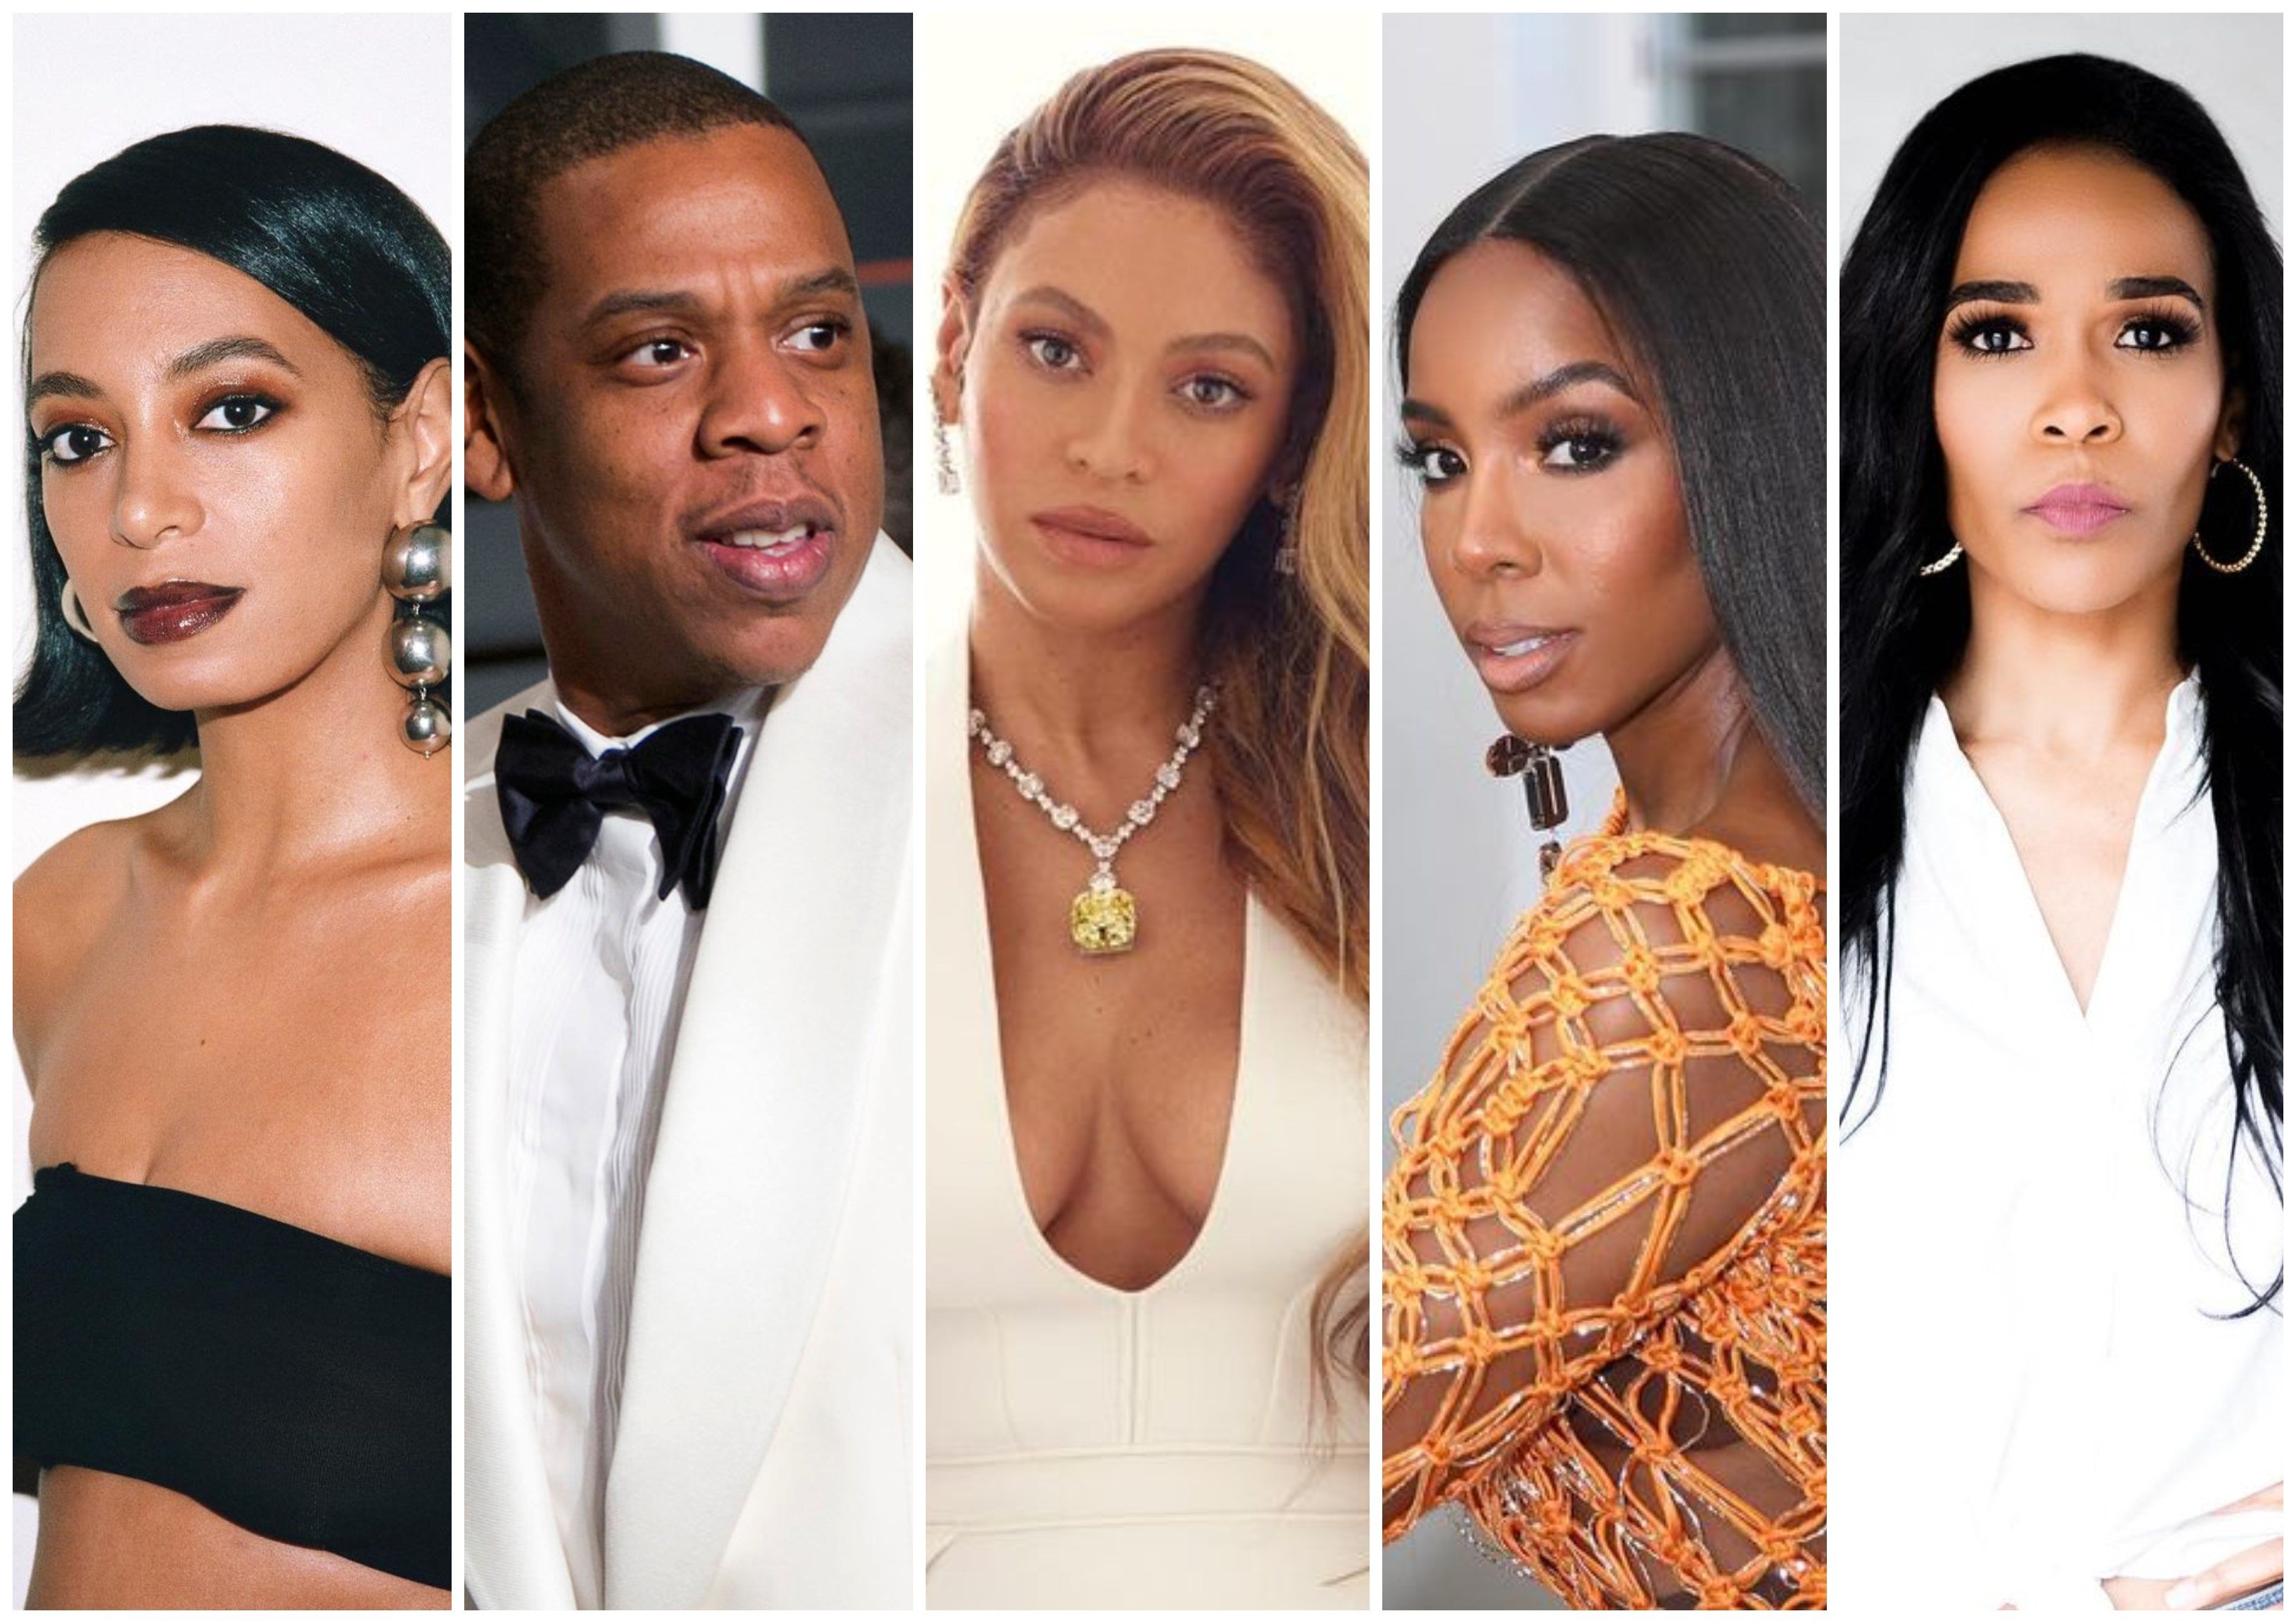 Destiny’s Child(ren), the high achievers of the Knowles-Carter family: Bianca Lawson, Jay-Z, Beyoncé, Kelly Rowland, Michelle Williams. Photo: @beyonce, @kellyrowland, @michellewilliams, @solangeknowles/Instagram, AP